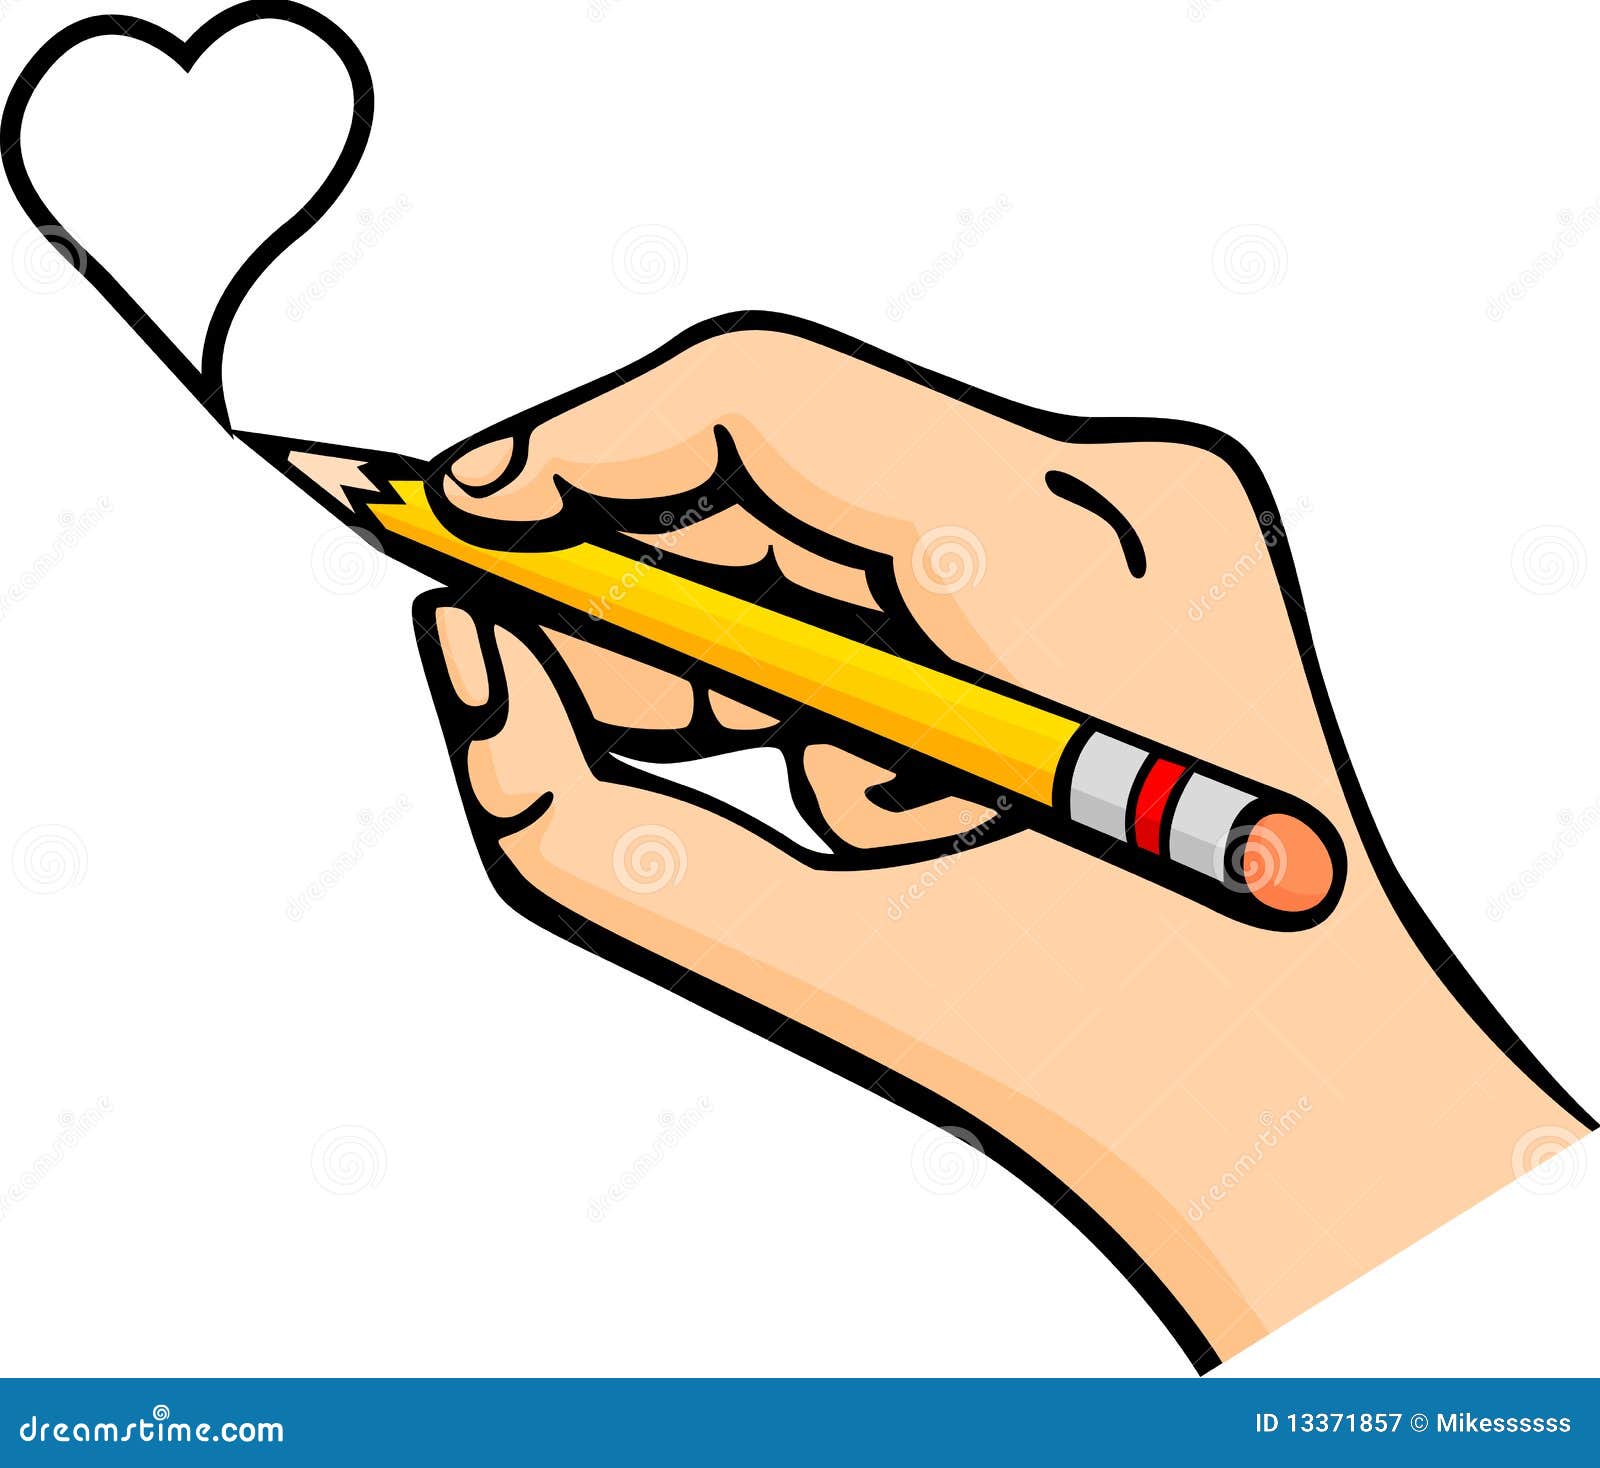 free clipart heart with hands - photo #15